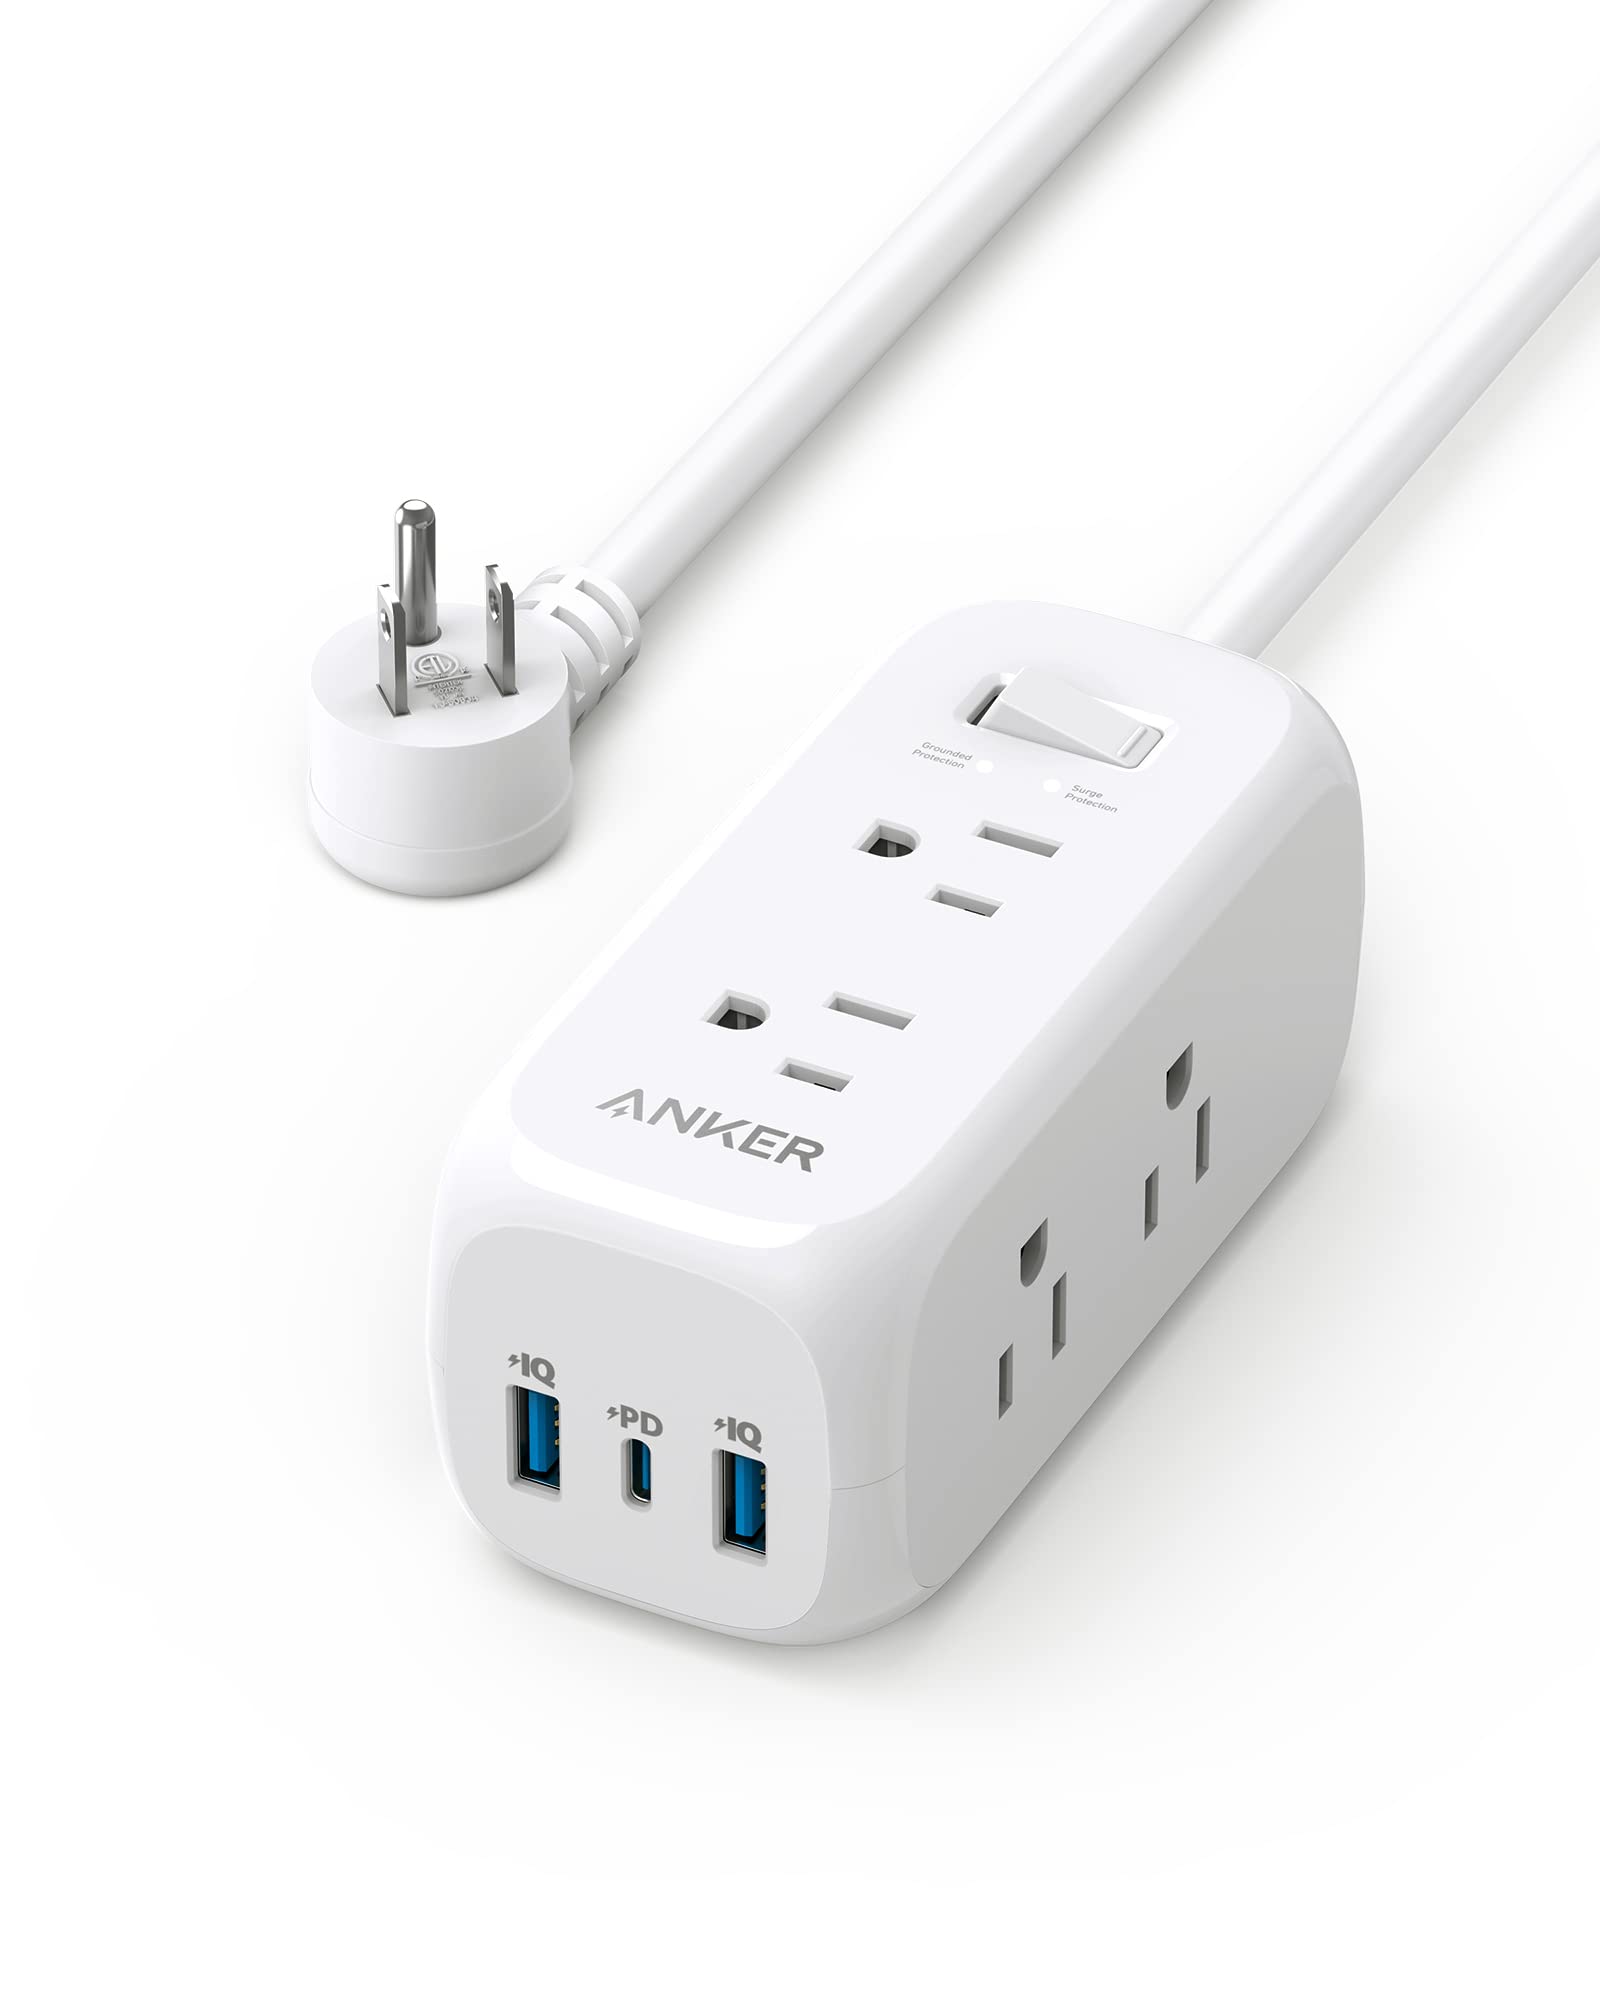 31% Off Anker USB C Power Strip Surge Protector 6 Outlets and 20W Power Delivery $17.99